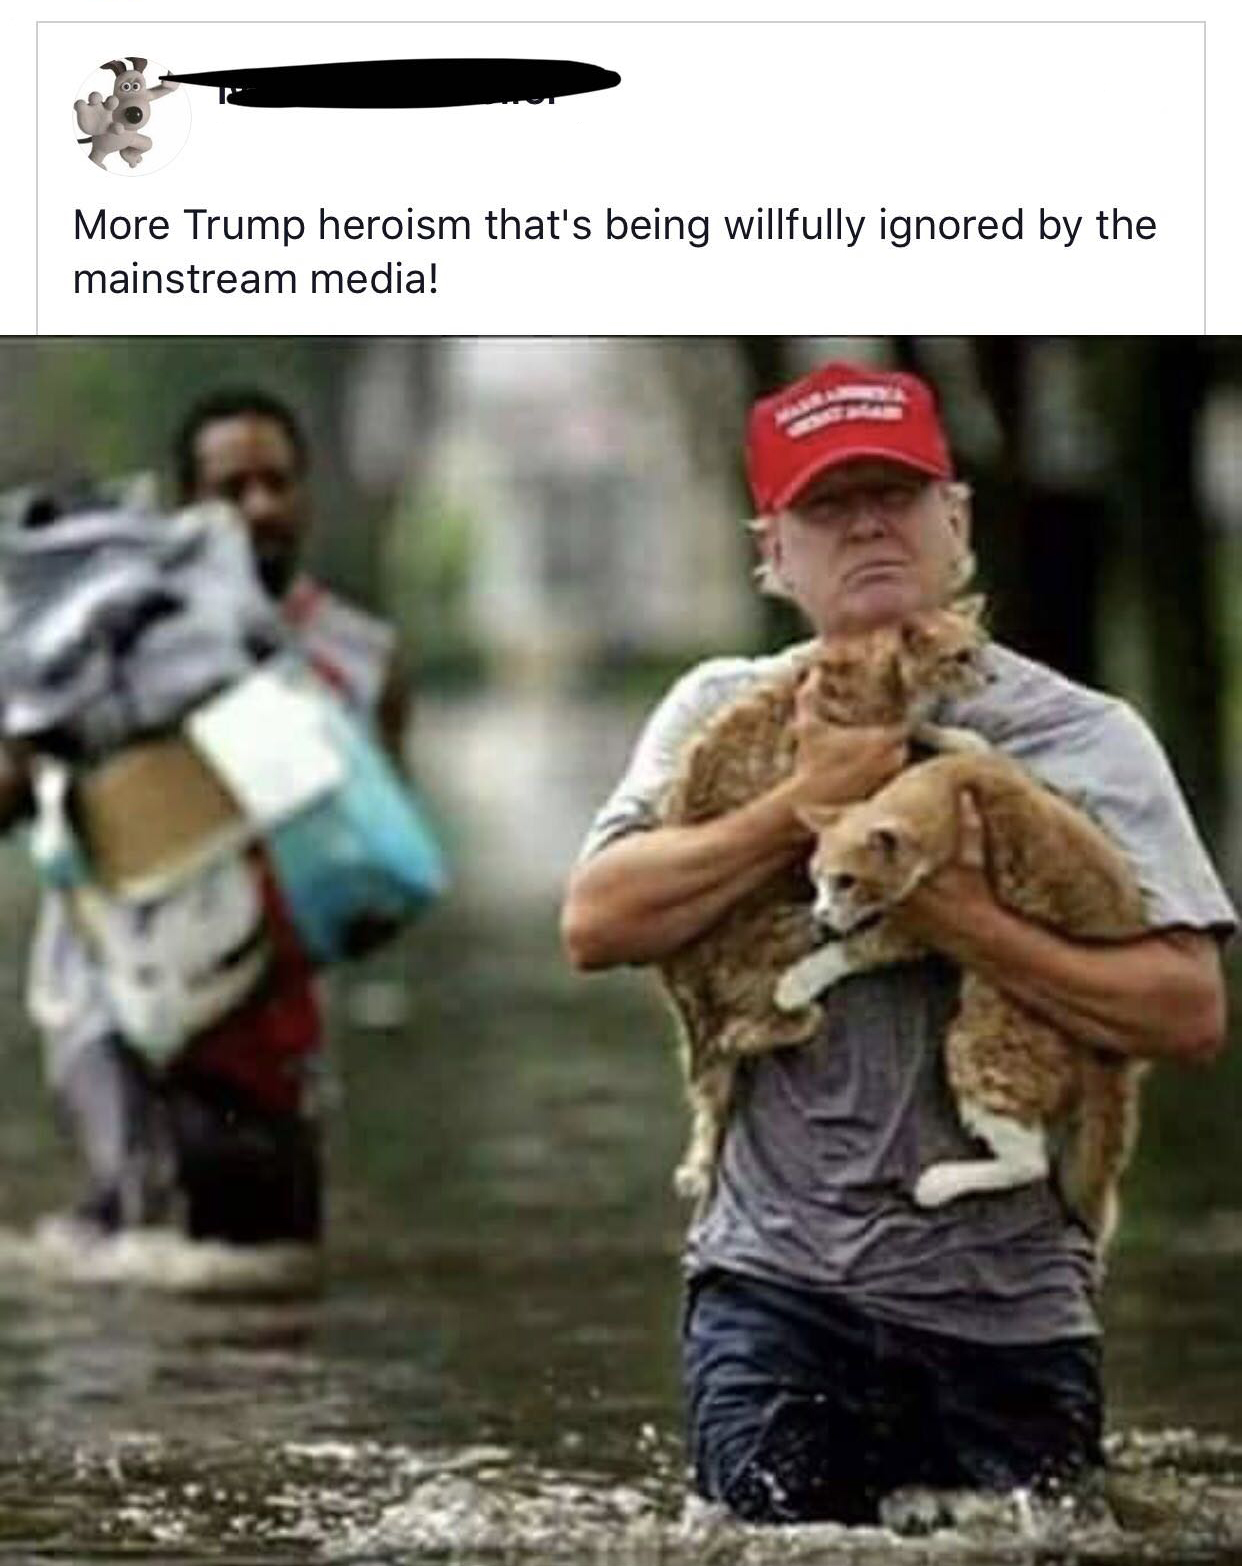 trump rescuing cats - More Trump heroism that's being willfully ignored by the mainstream media!